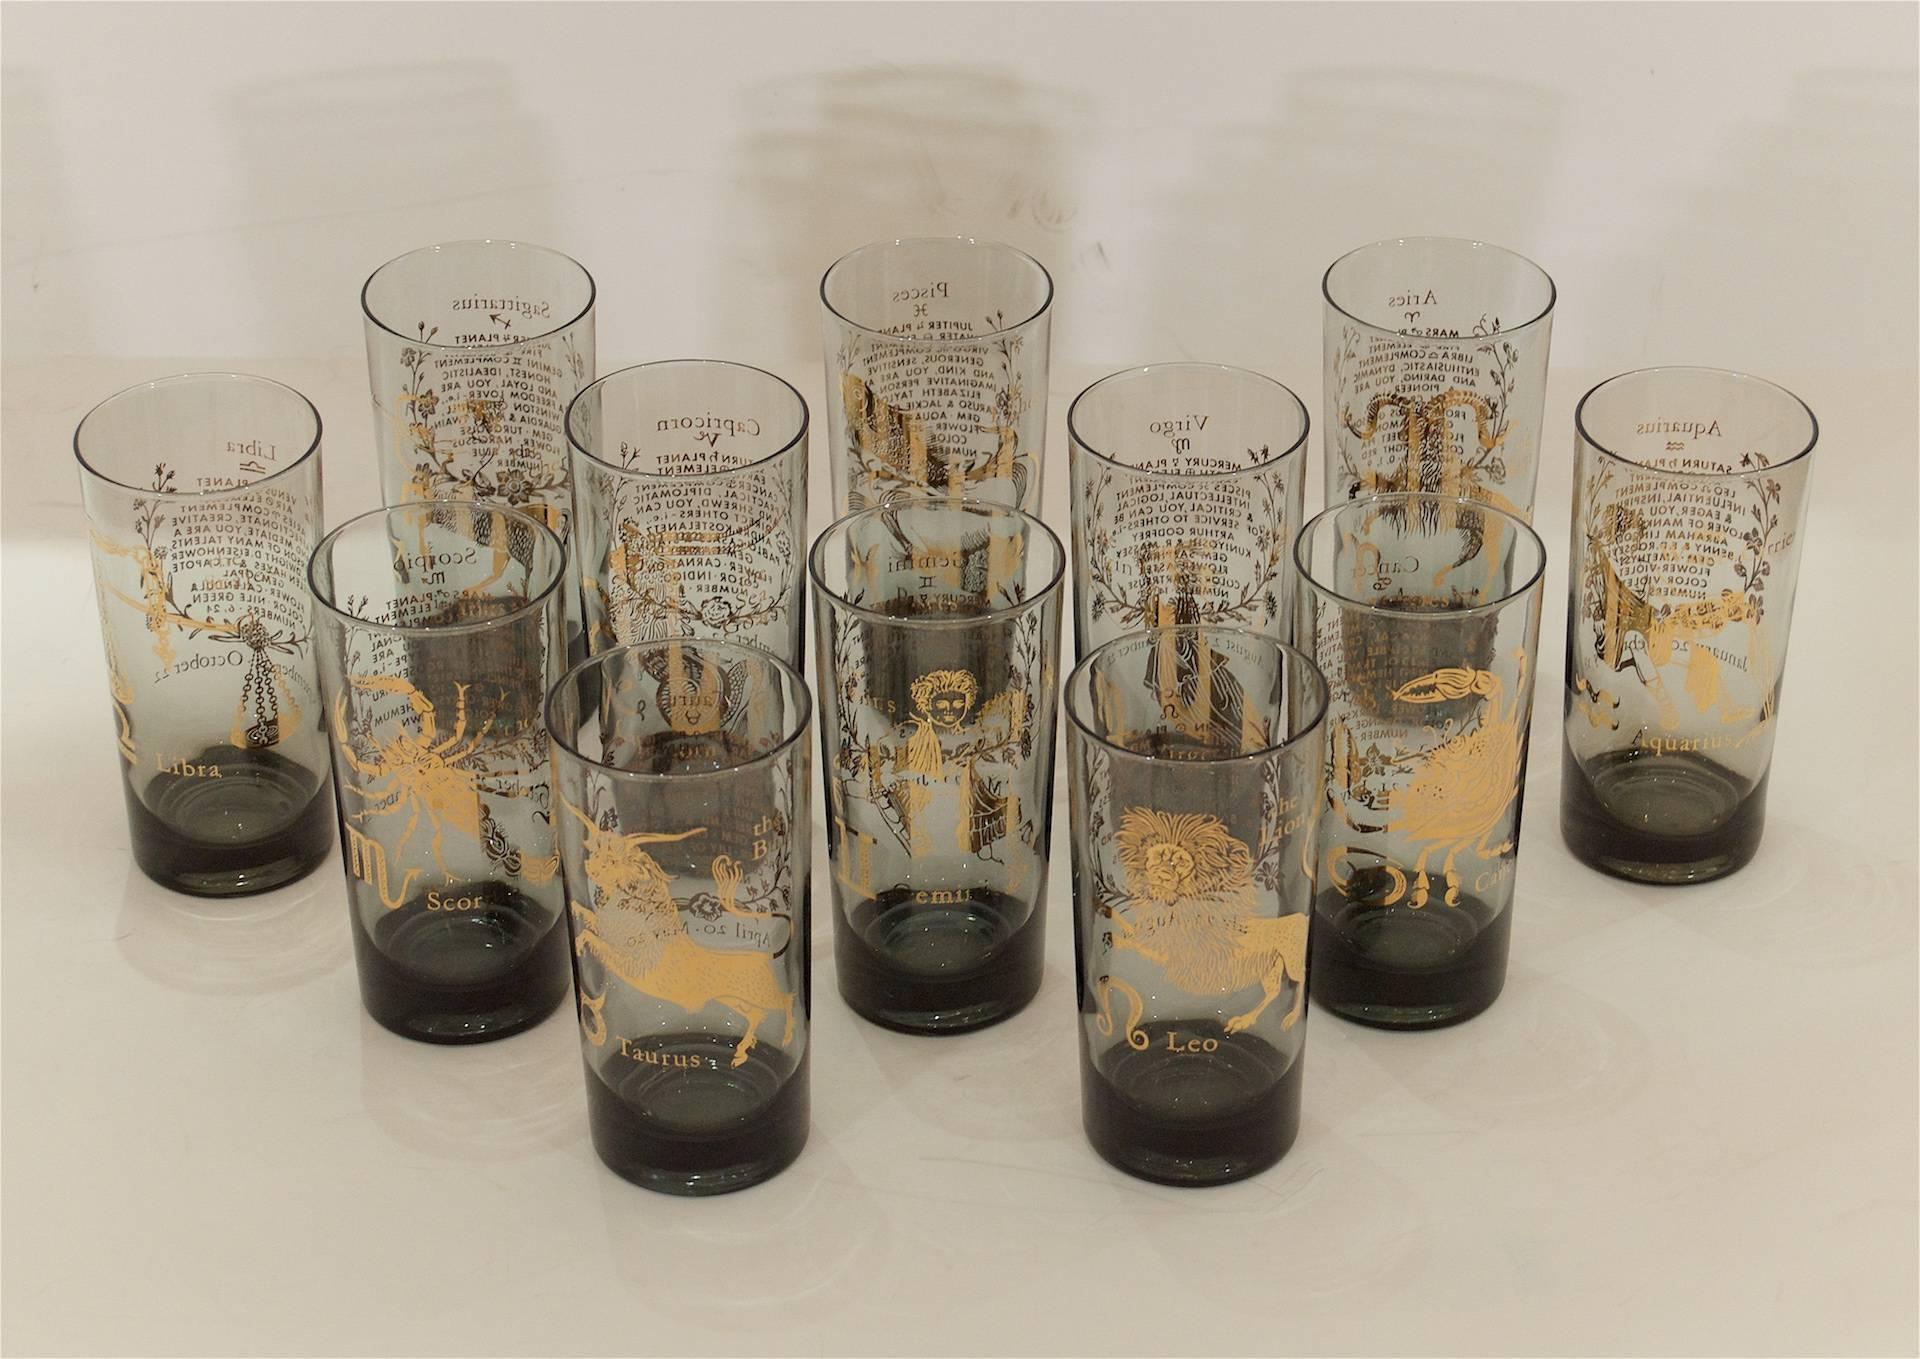 Complete, rare set of smoke-tone glasses by Federal Glass with the twelve signs of the Zodiac illustrated in gold. No flaws.